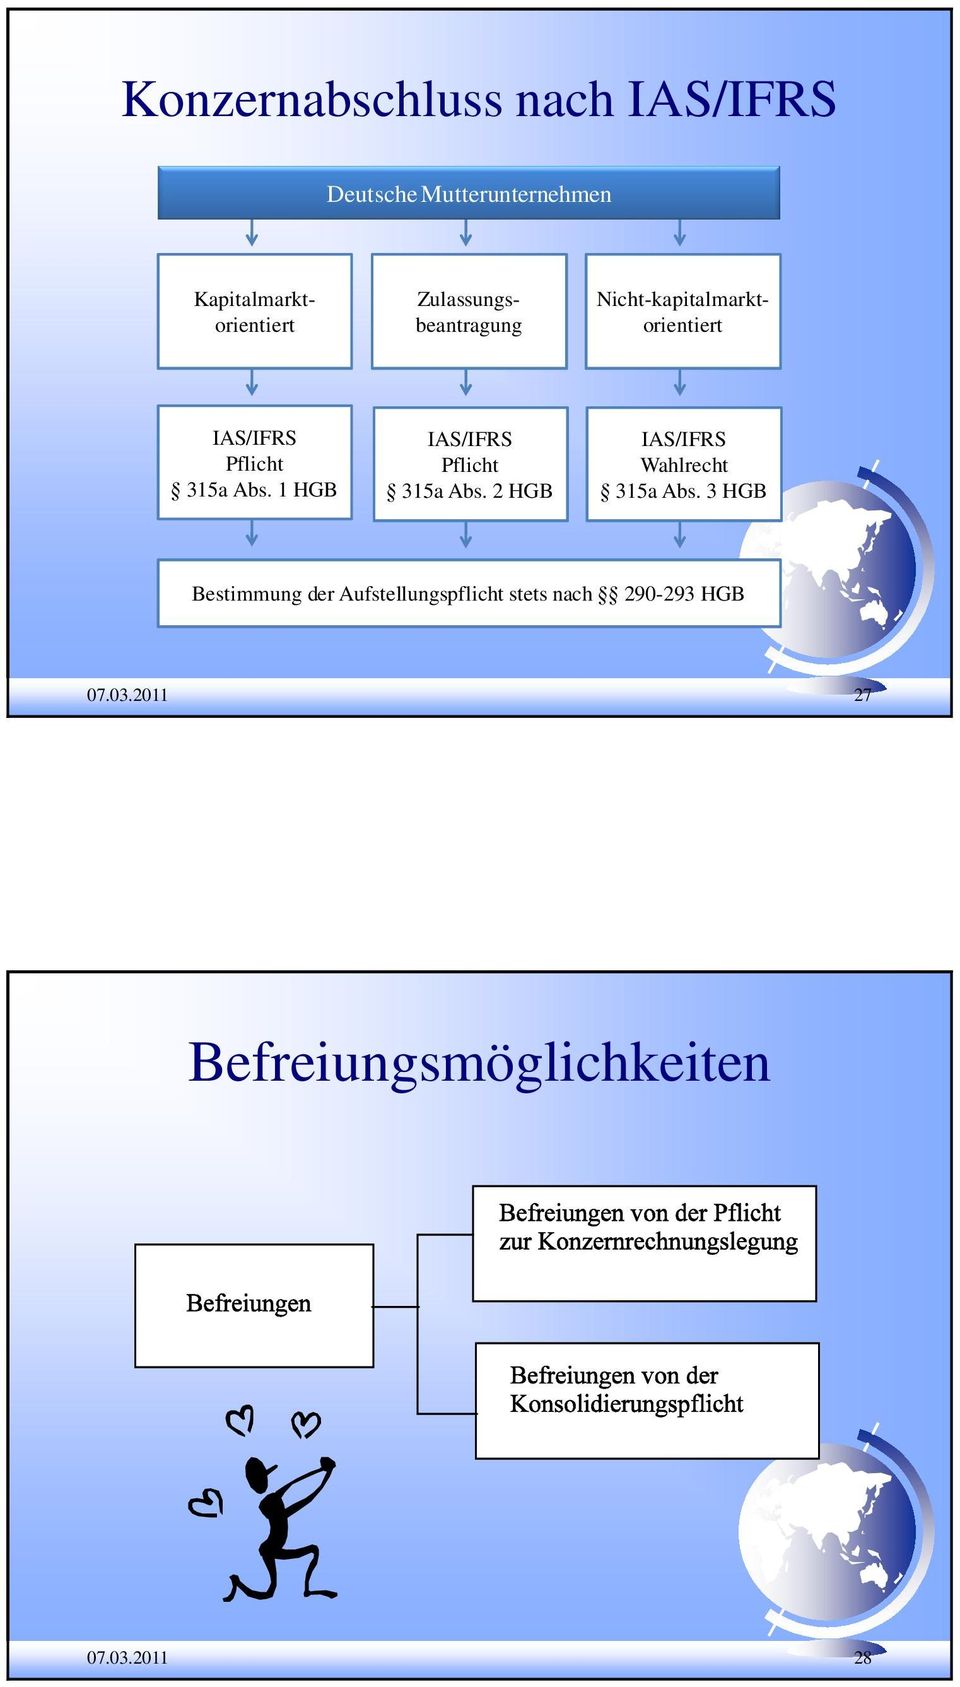 1 HGB IAS/IFRS Pflicht 315a Abs. 2 HGB IAS/IFRS Wahlrecht 315a Abs.